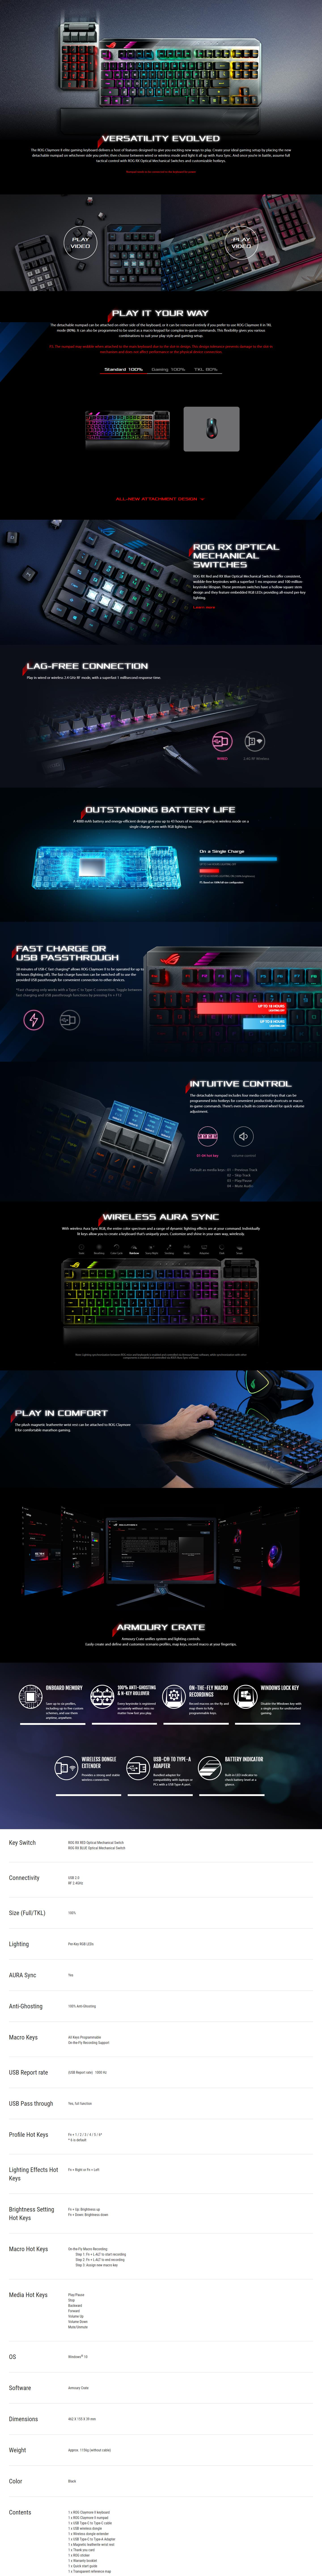 A large marketing image providing additional information about the product ASUS ROG Claymore TKL 80%/100% Wireless Mechanical Gaming Keyboard - ROG RX Blue - Additional alt info not provided